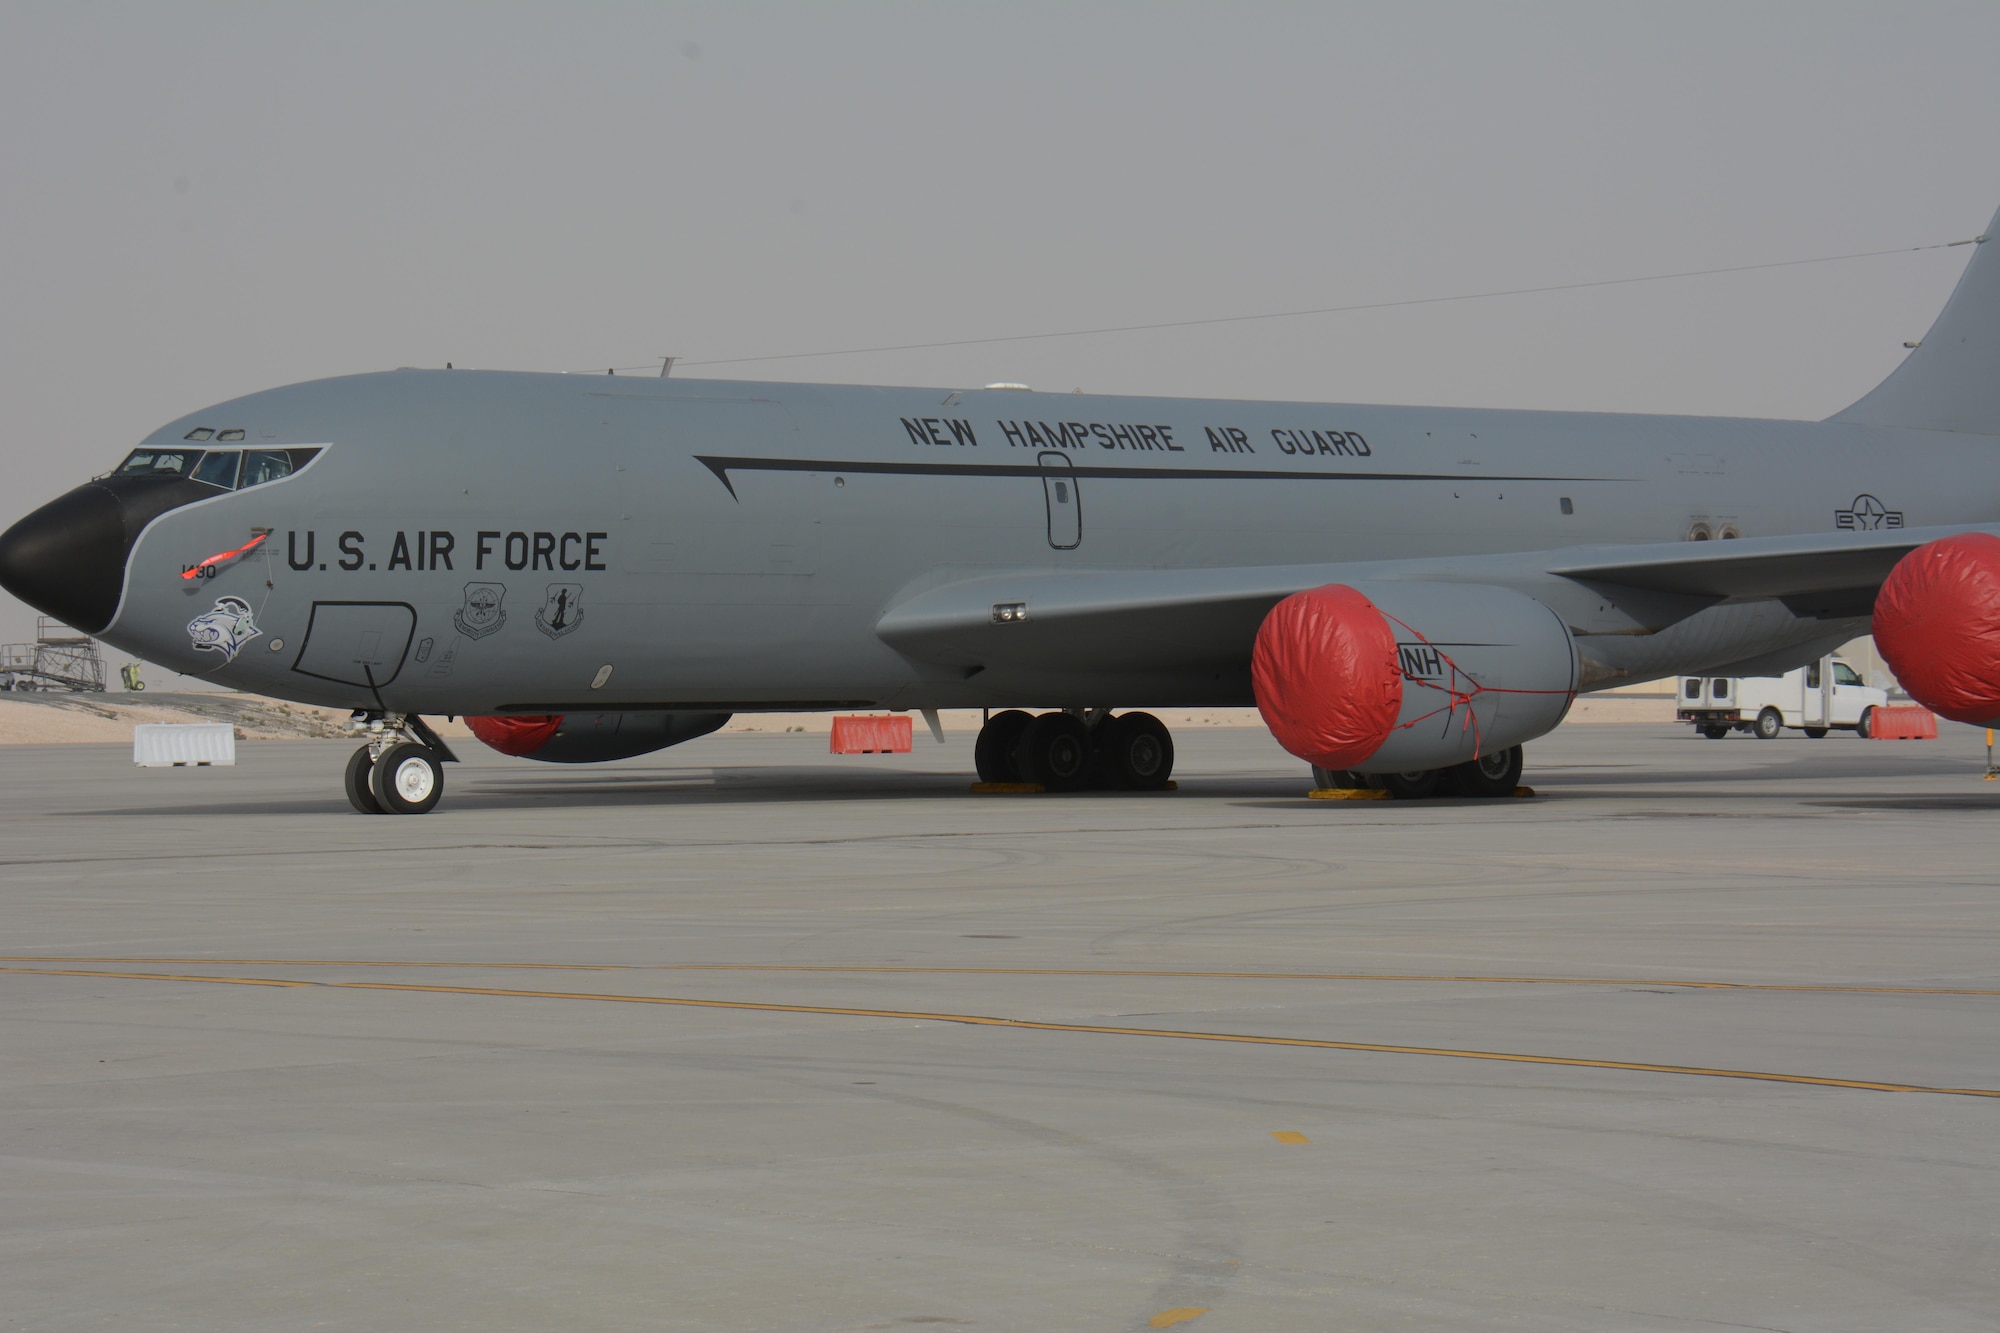 A KC-135 Stratotanker deployed from the 157th Air Refueling Wing in New Hampshire, waits for visitors at the annual Flight Line Fest Jan. 10 at Al Udeid Air Base, Qatar. The KC-135 fleet at AUAB, the largest in the world, flew more than 100,000 combat hours in 2015. The KC-135 was one of five U.S. Air Force aircraft on display during the event. Flight Line Fest is a joint partnership between the 379th Air Expeditionary Wing and Qatar Emiri Air Force held to foster relations between Qatar and the United States. (U.S. Air Force photo by Tech. Sgt. James Hodgman/Released)